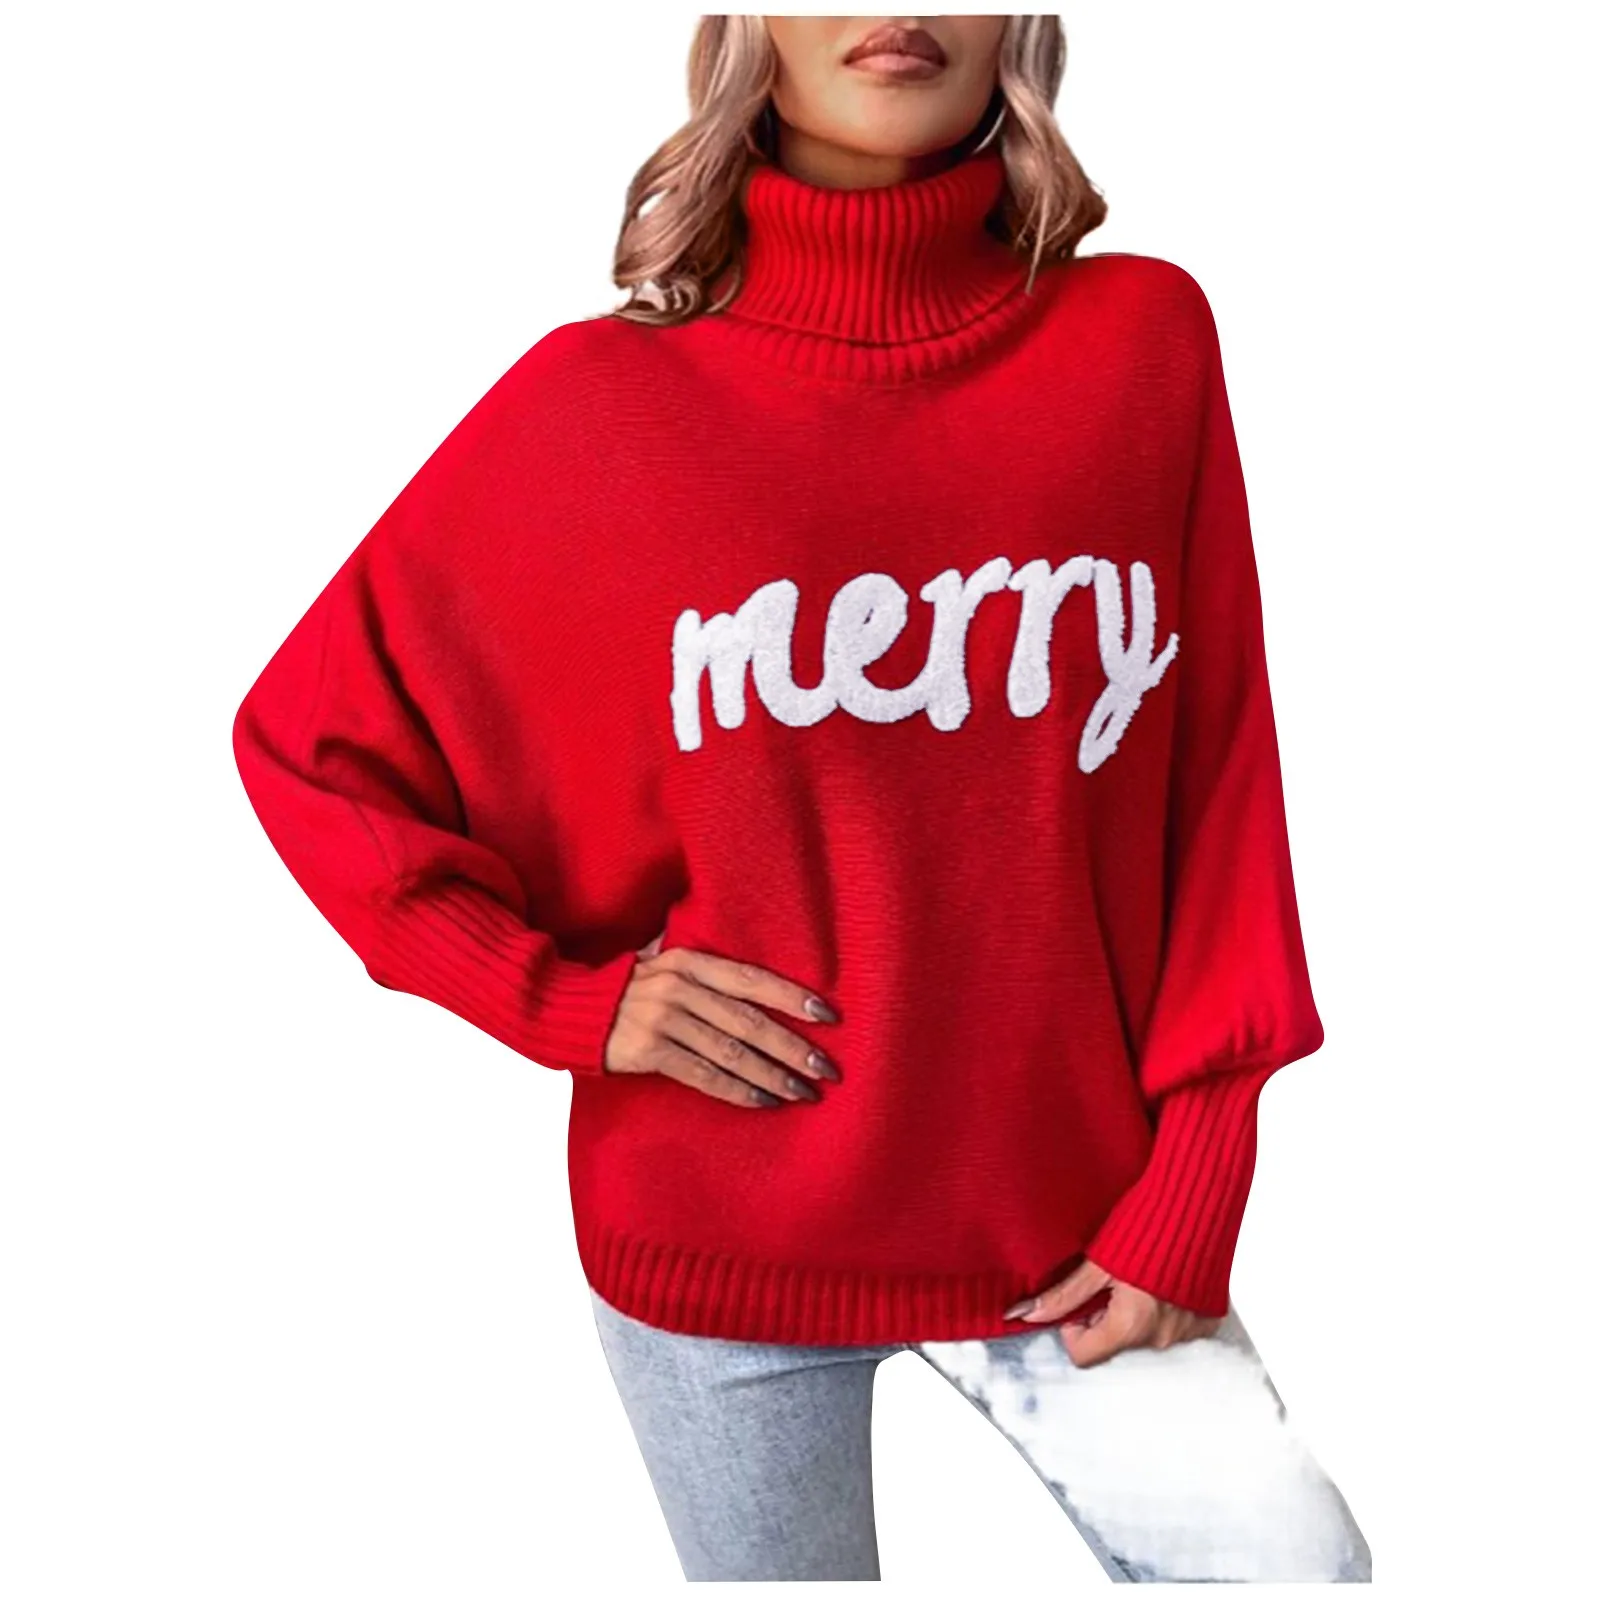 

Women Sweater Autumn Fashion Christmas Snowflake Pattern High Neck Casual Long Sleeve Loose Daily Pullover Knit Sweater